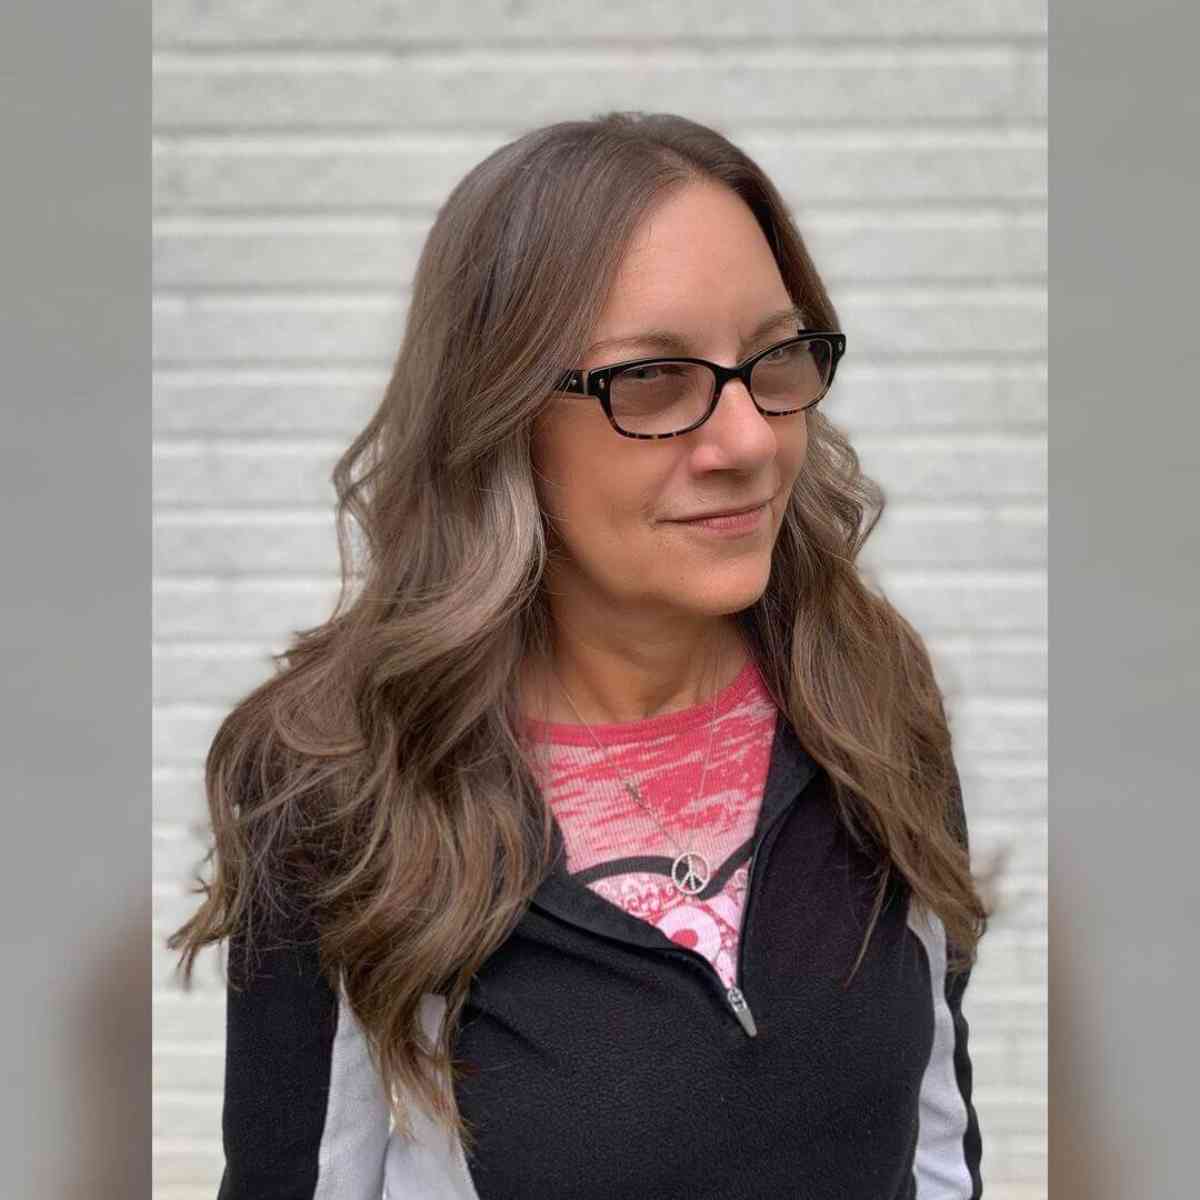 Long Hair for Women with Glasses in Their 40s